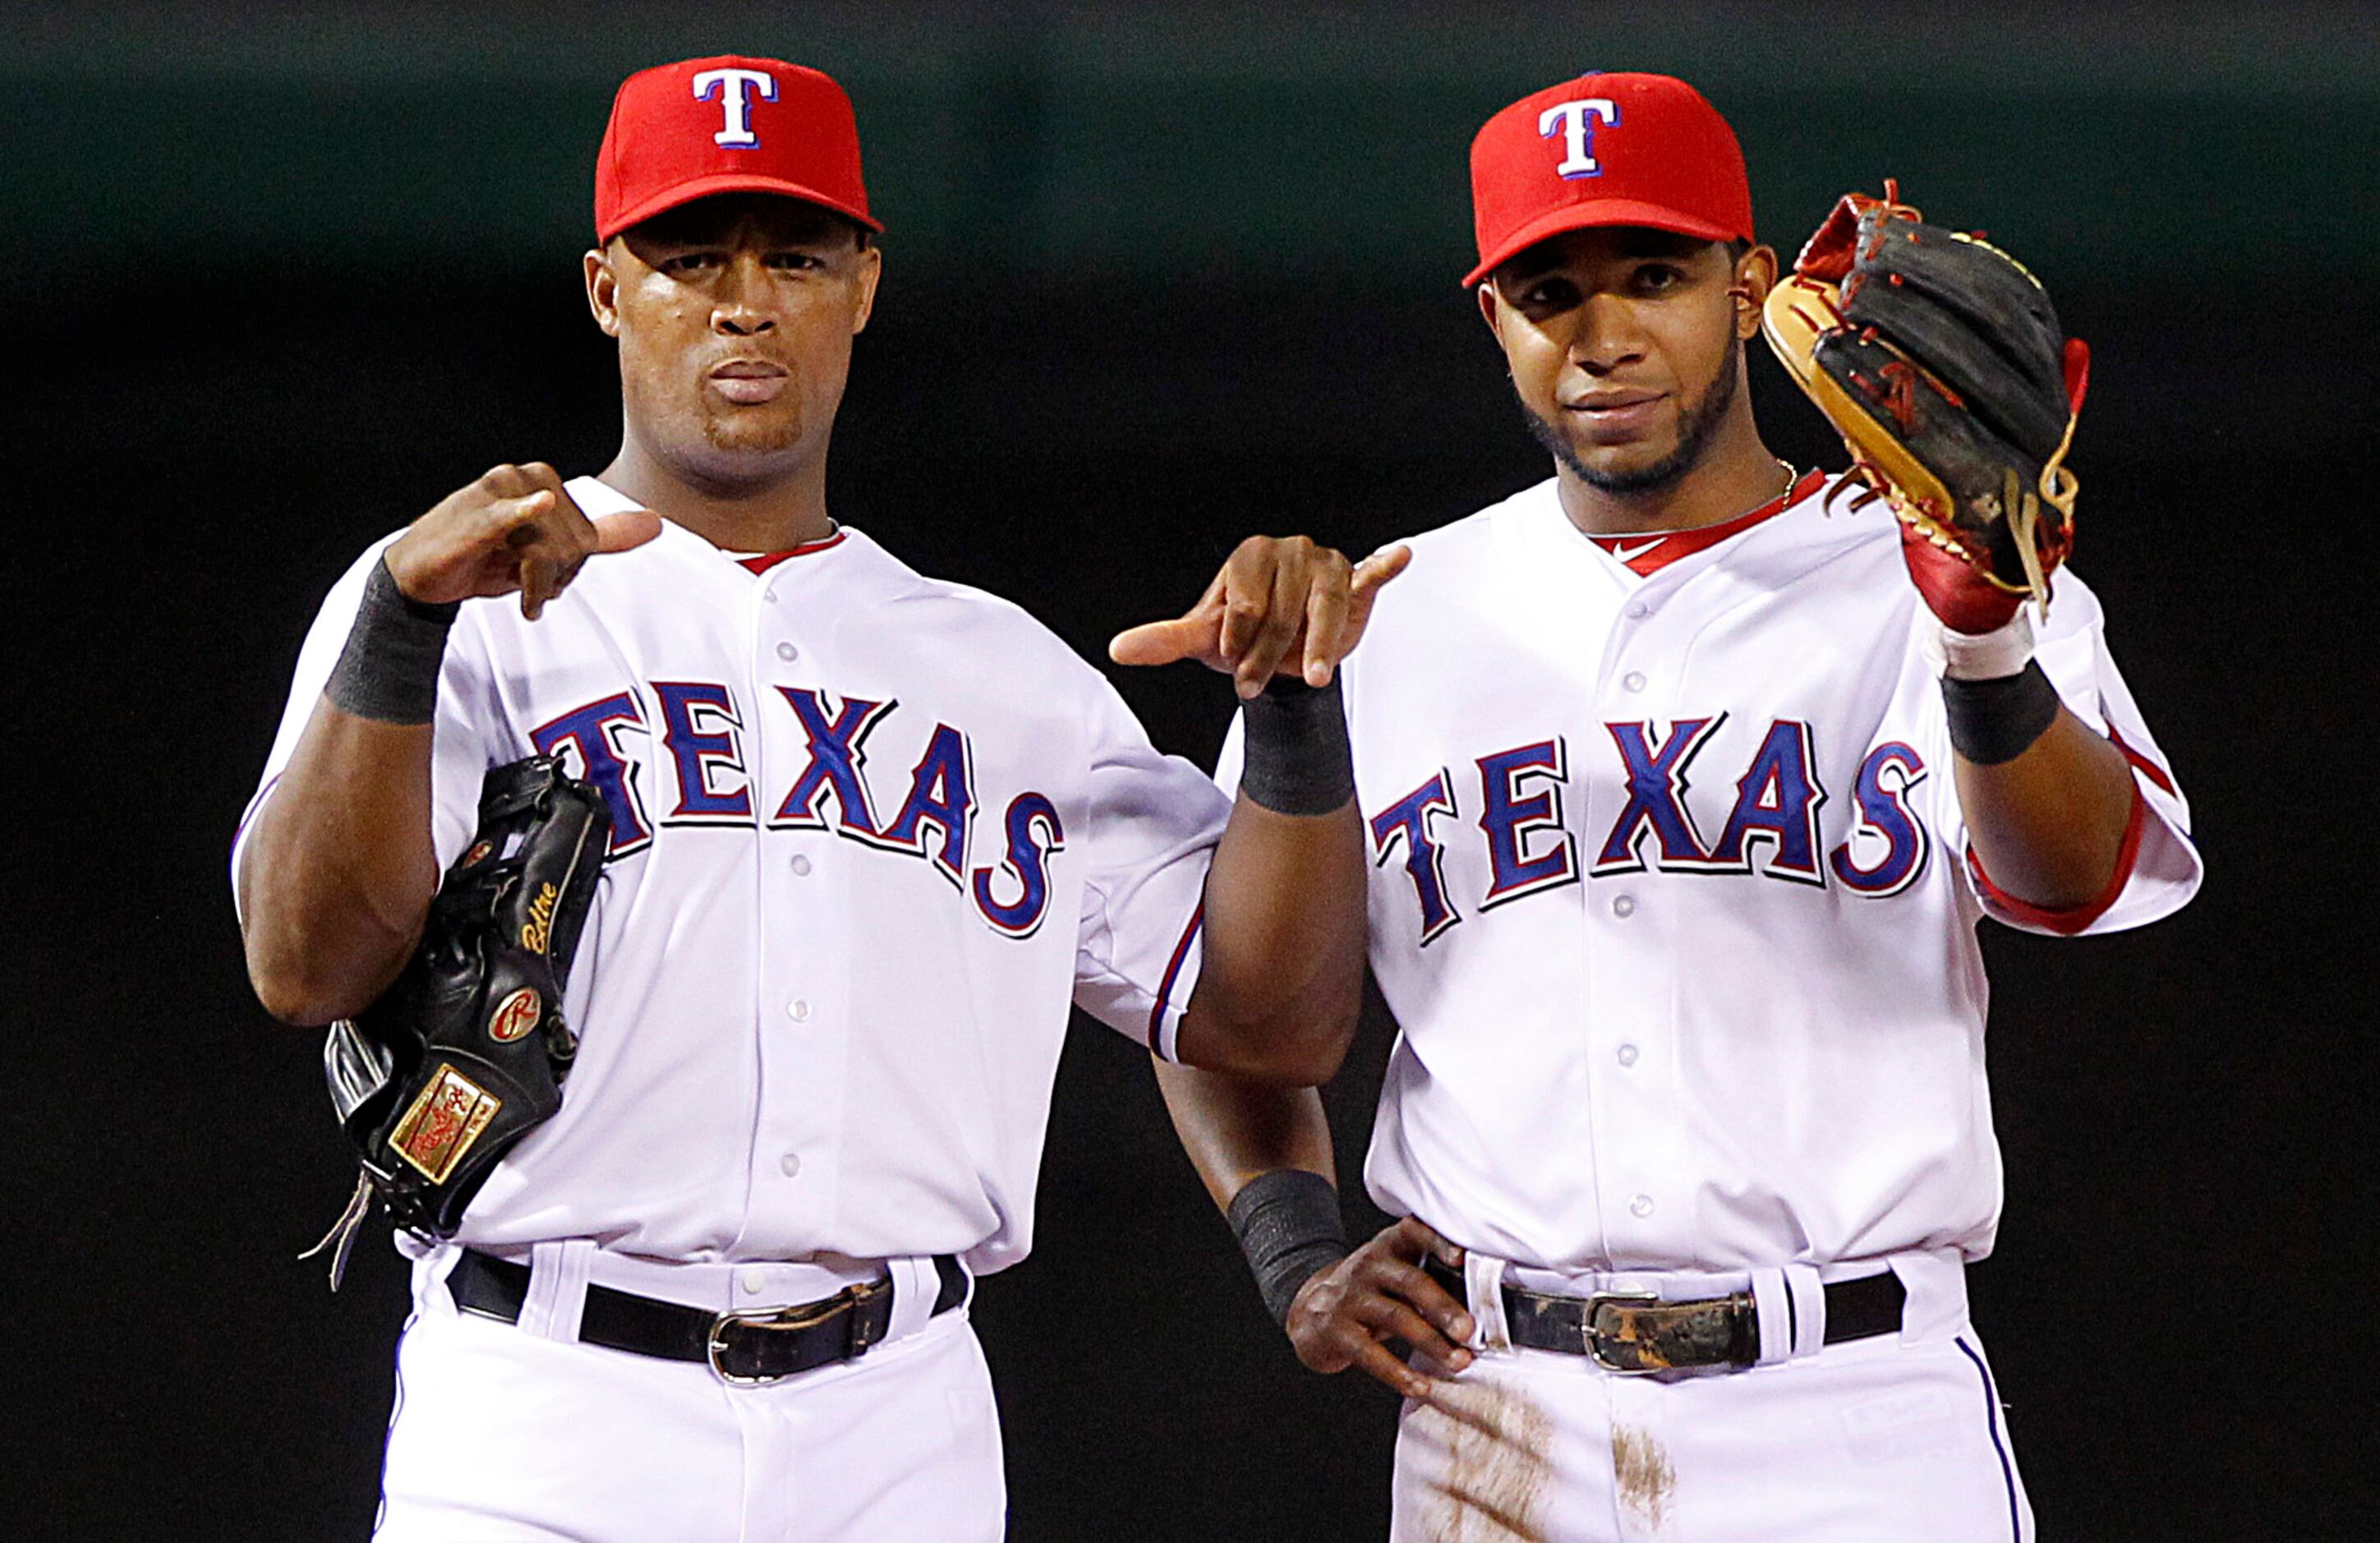 PHOTOS: Relive the retirement of Adrian Beltre's No. 29 Texas Rangers jersey